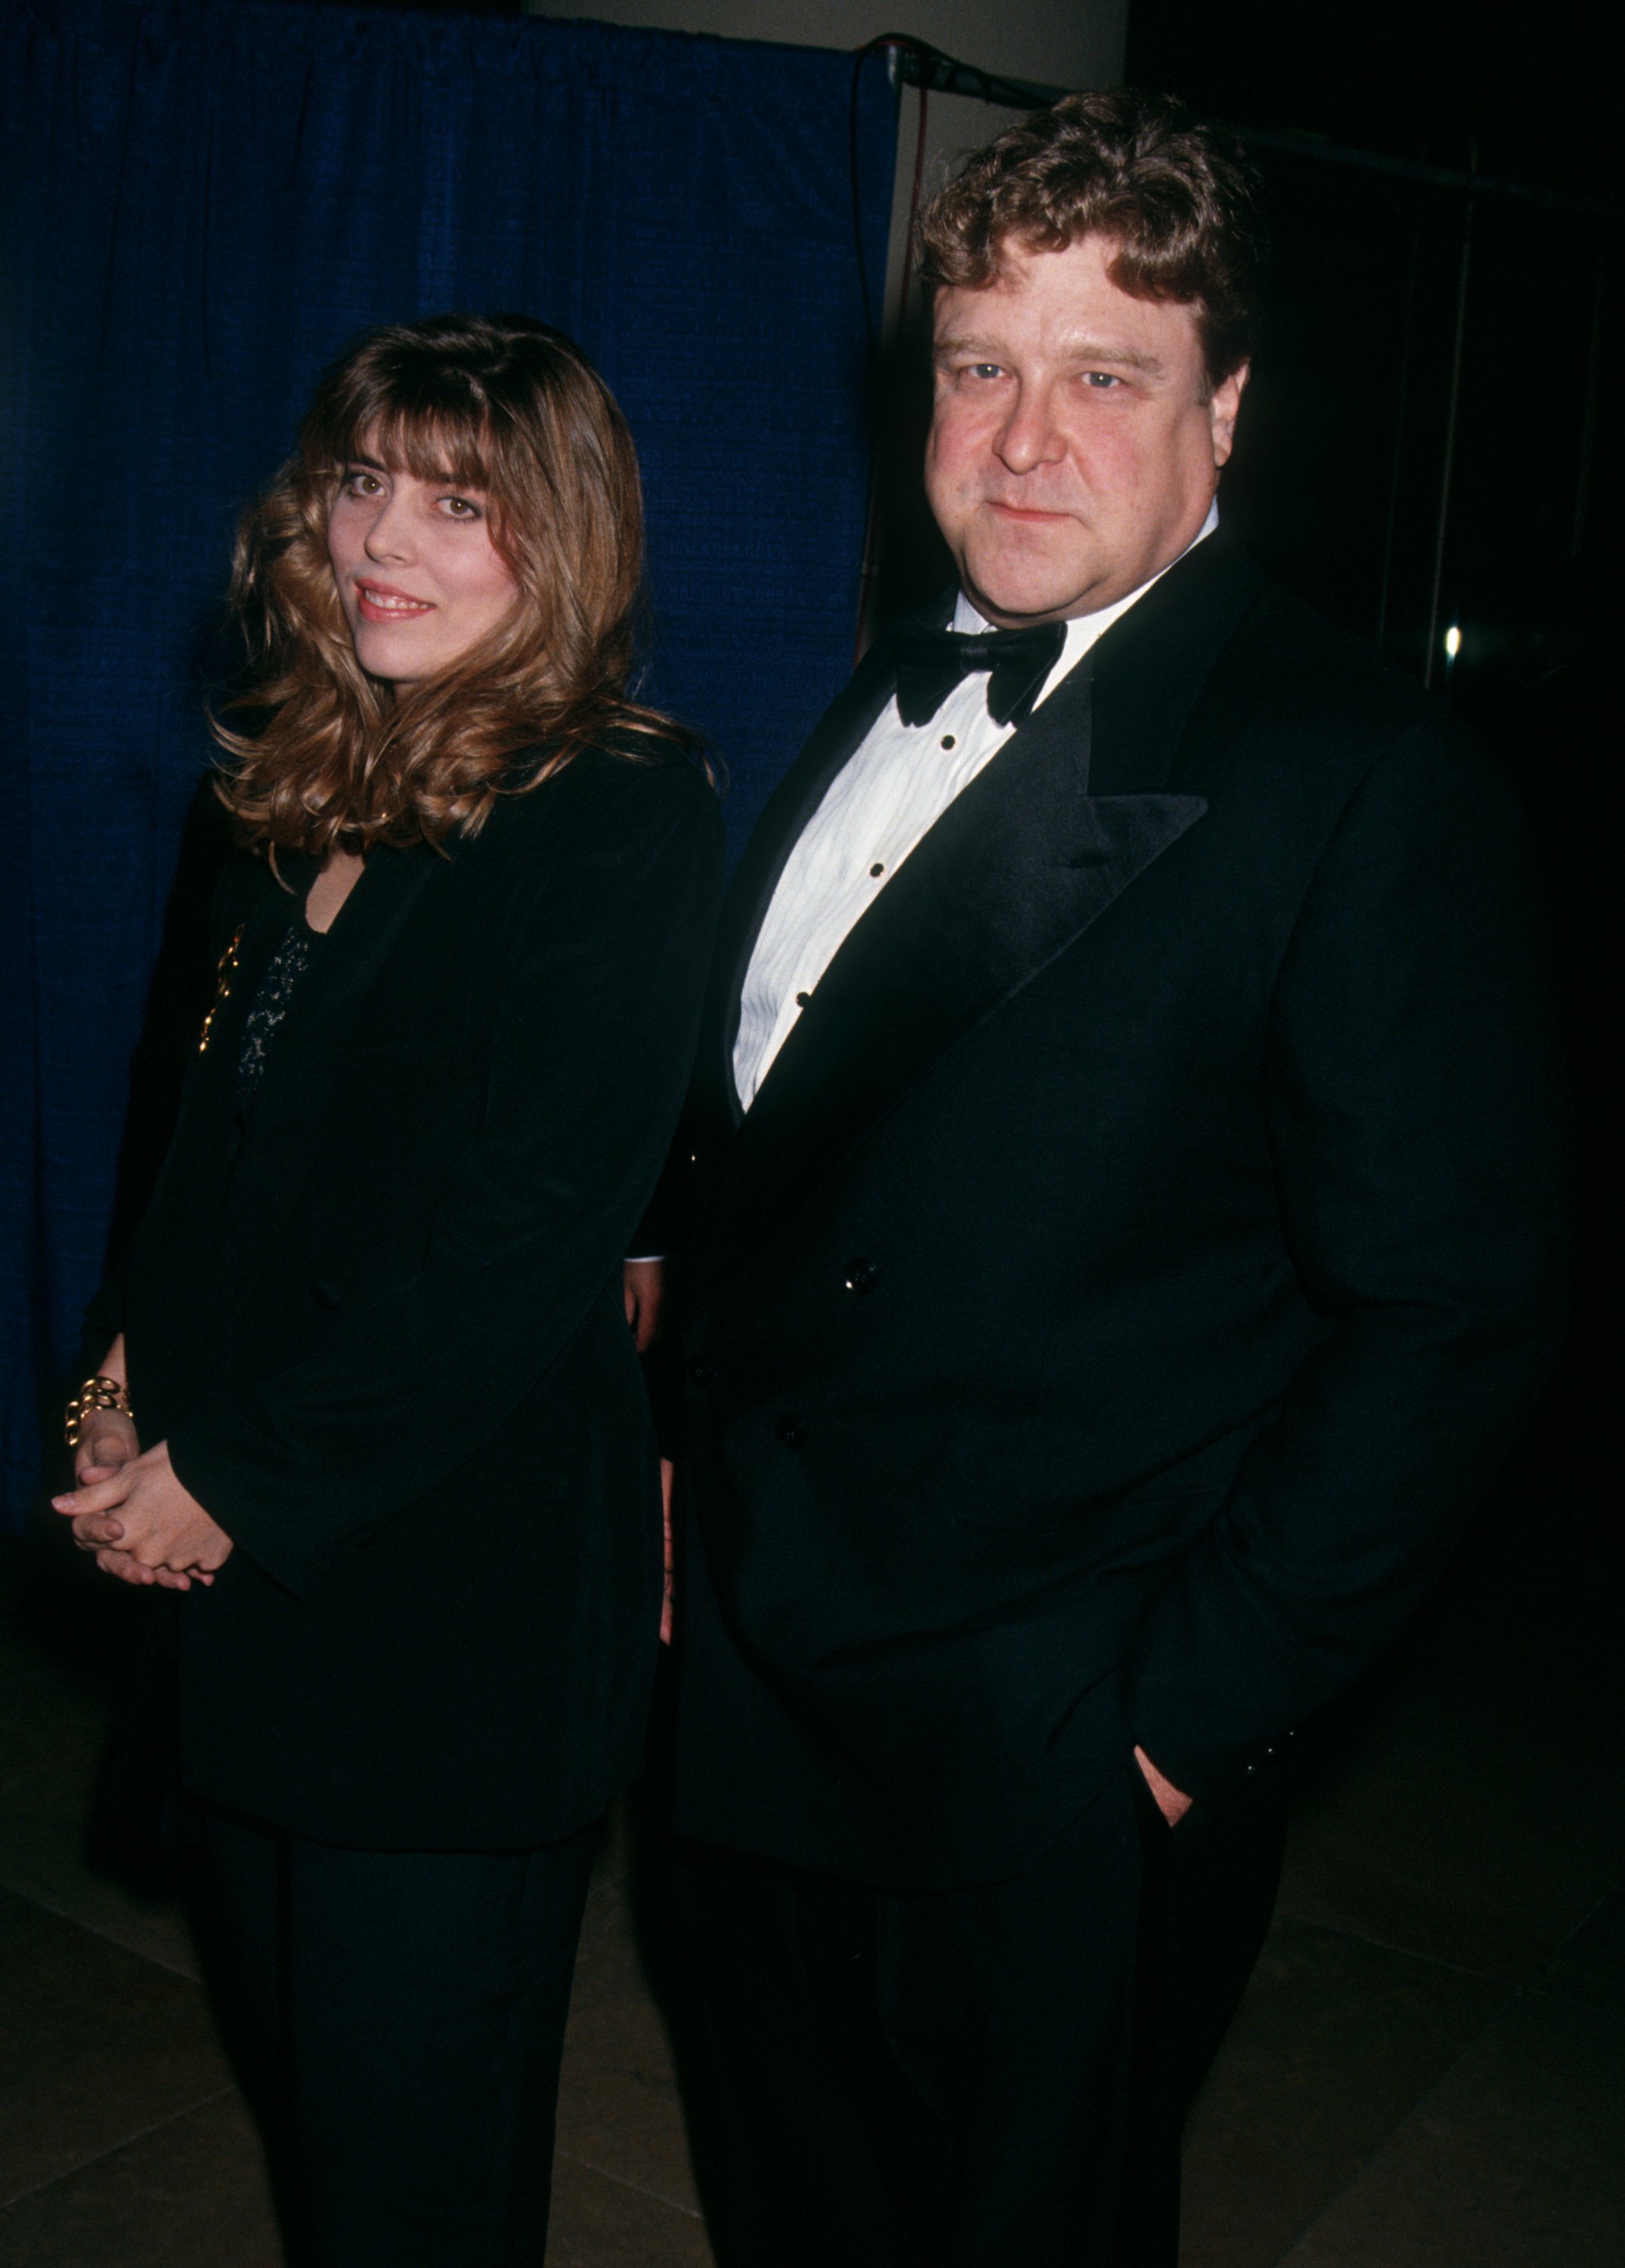 John Goodman and Annabeth Goodman are pictured at the 50th Annual Golden Globe Awards at the Beverly Hilton Hotel on January 23, 1993, in Beverly Hills, California | Source: Getty Images